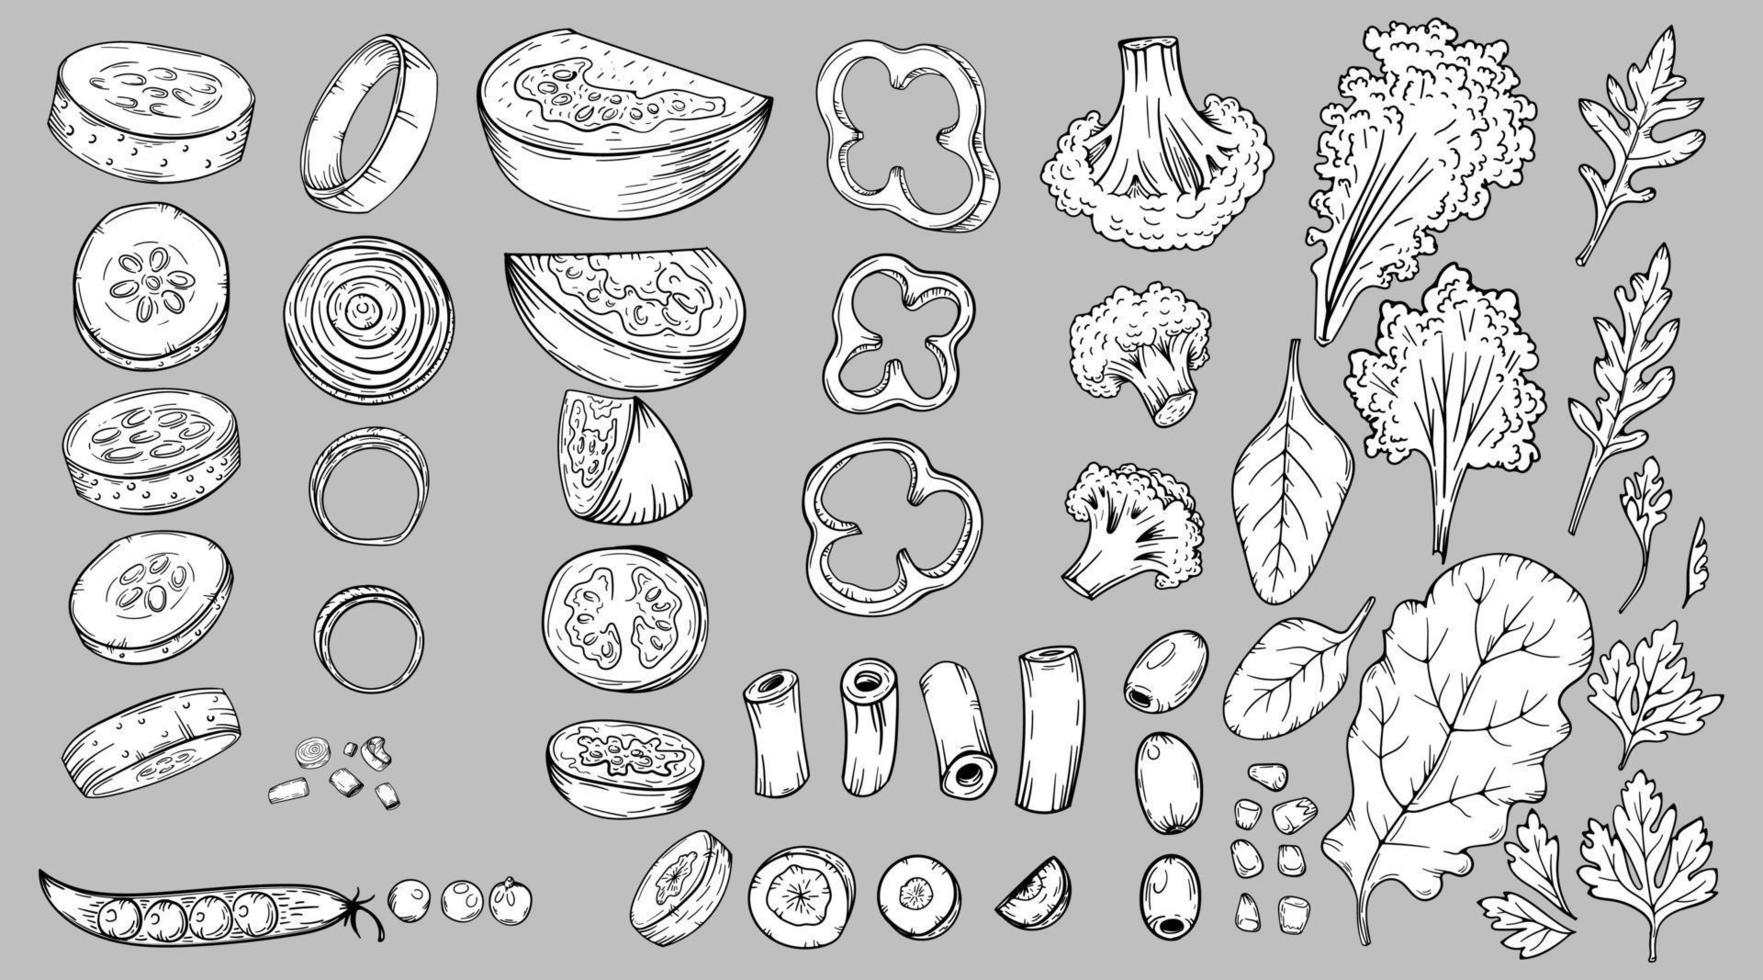 Vegetables food slices carrots, cucumbers, cabbage, tomato, broccoli, etc. Hand drawn sketch vector illustrations in black isolated. For vegan restaurant menu. Thanksgiving recipe